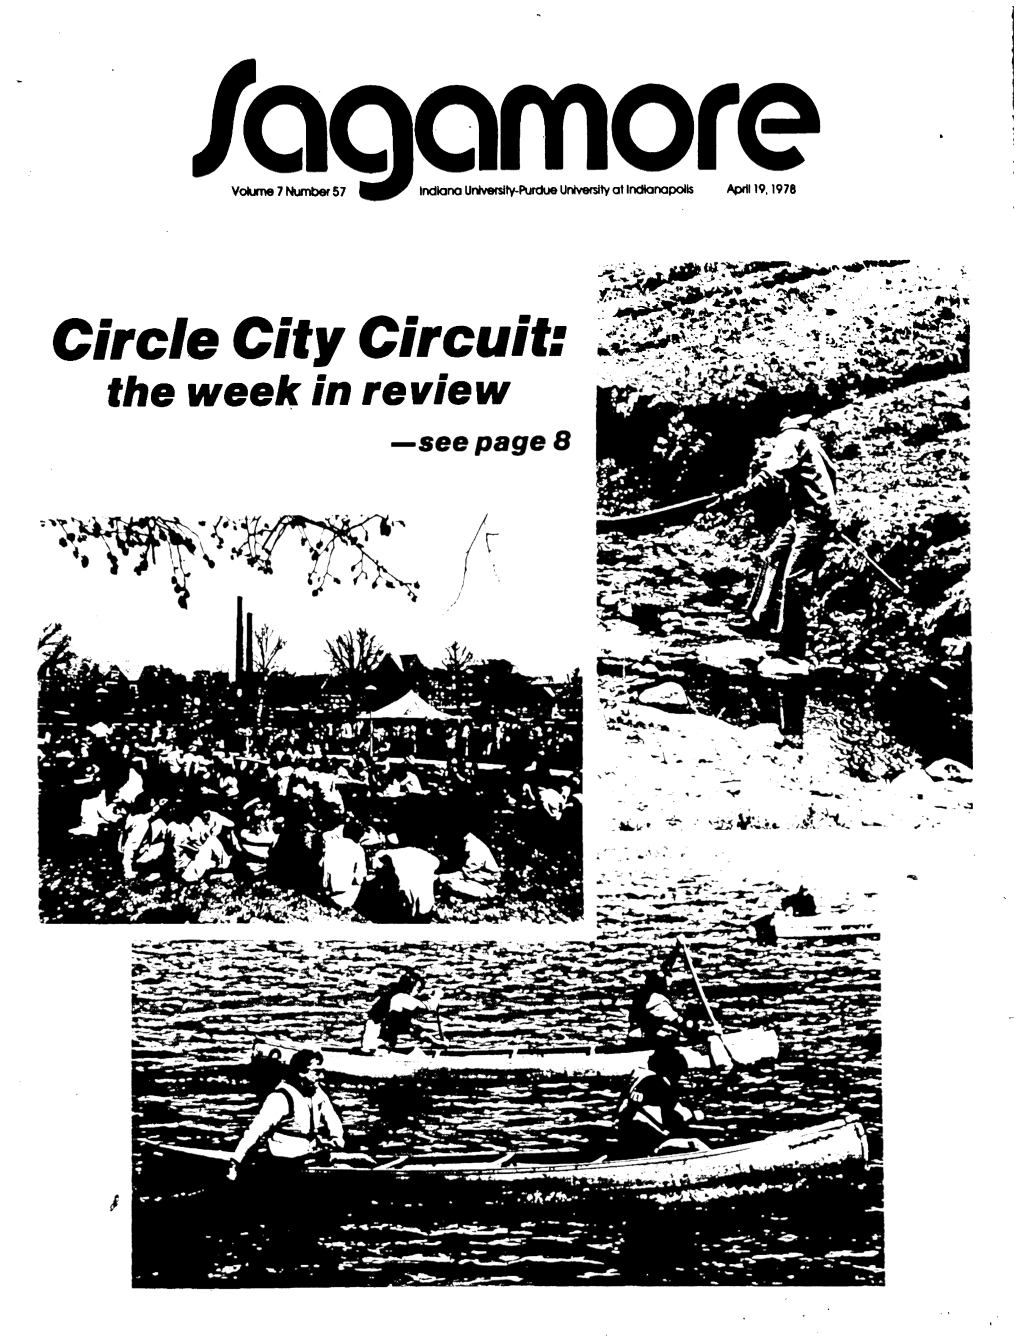 Circle City Circuit the Week in Review T Soqomor* 4/19/71